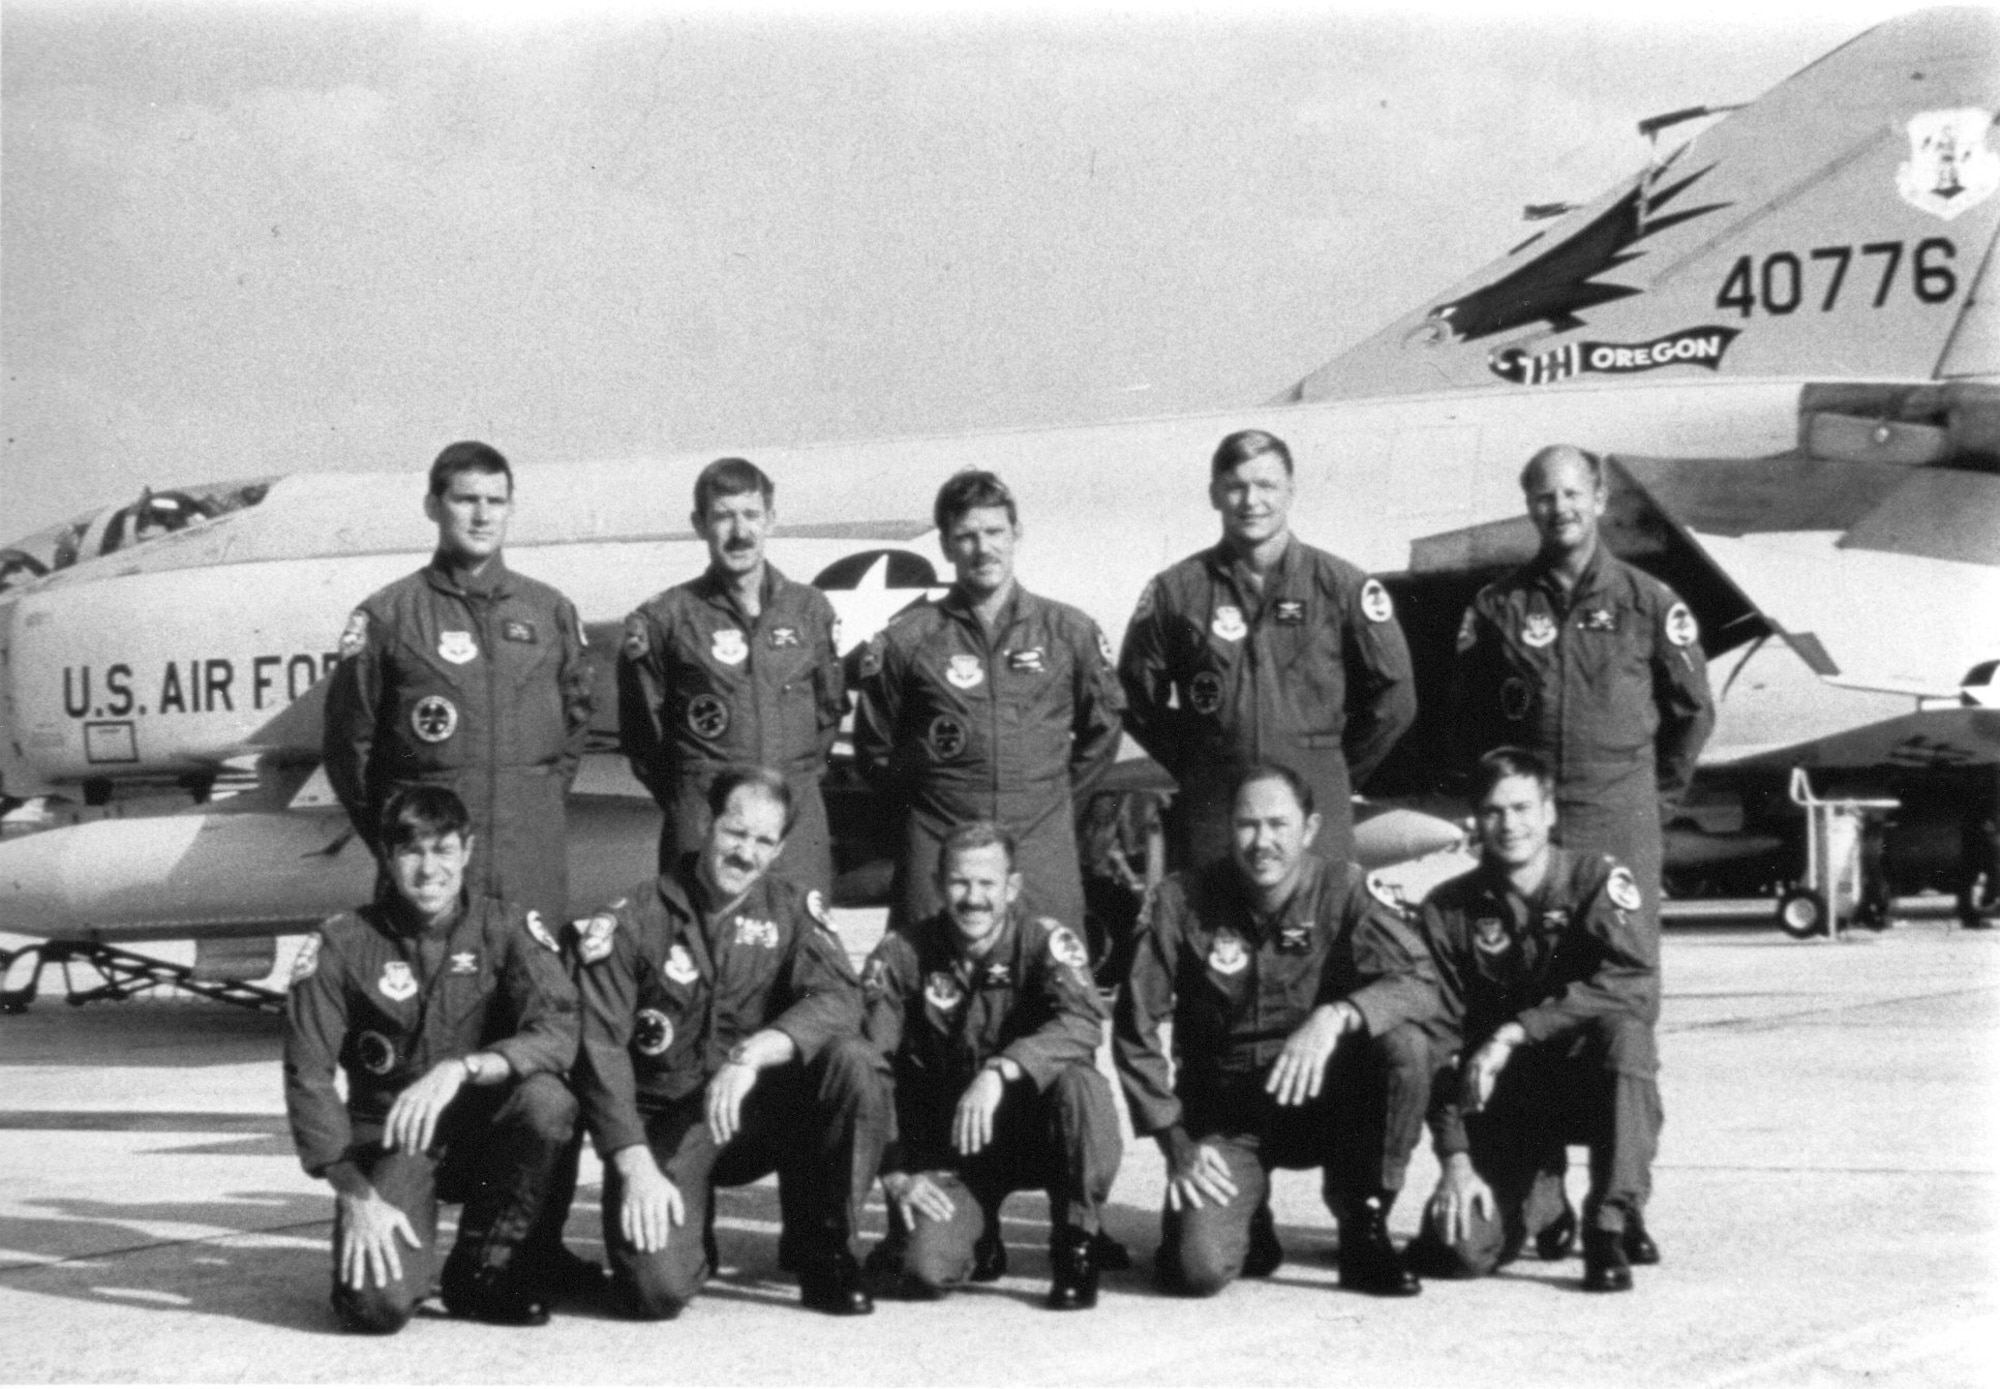 Redhawk aircrew participating are shown here, with F-4C-23-MC 64-0776 as the backdrop, from left to right – Standing:  Maj Bill DeJager (Top Gun WSO), Capt Steve Allison, Capt Dick Peterson, Maj Terry McKinsey and Maj Carl Hellis.  Kneeling:  Maj Ron Moore (Top Gun pilot), Capt Larry Kemp, Lt Col Ray Pilcher, Maj Scott Powell and Maj Dennis Anderson.  Aircraft 776 is preserved today at the Boeing Museum of Flight in Seattle, WA.  (142FW/HO Archives)